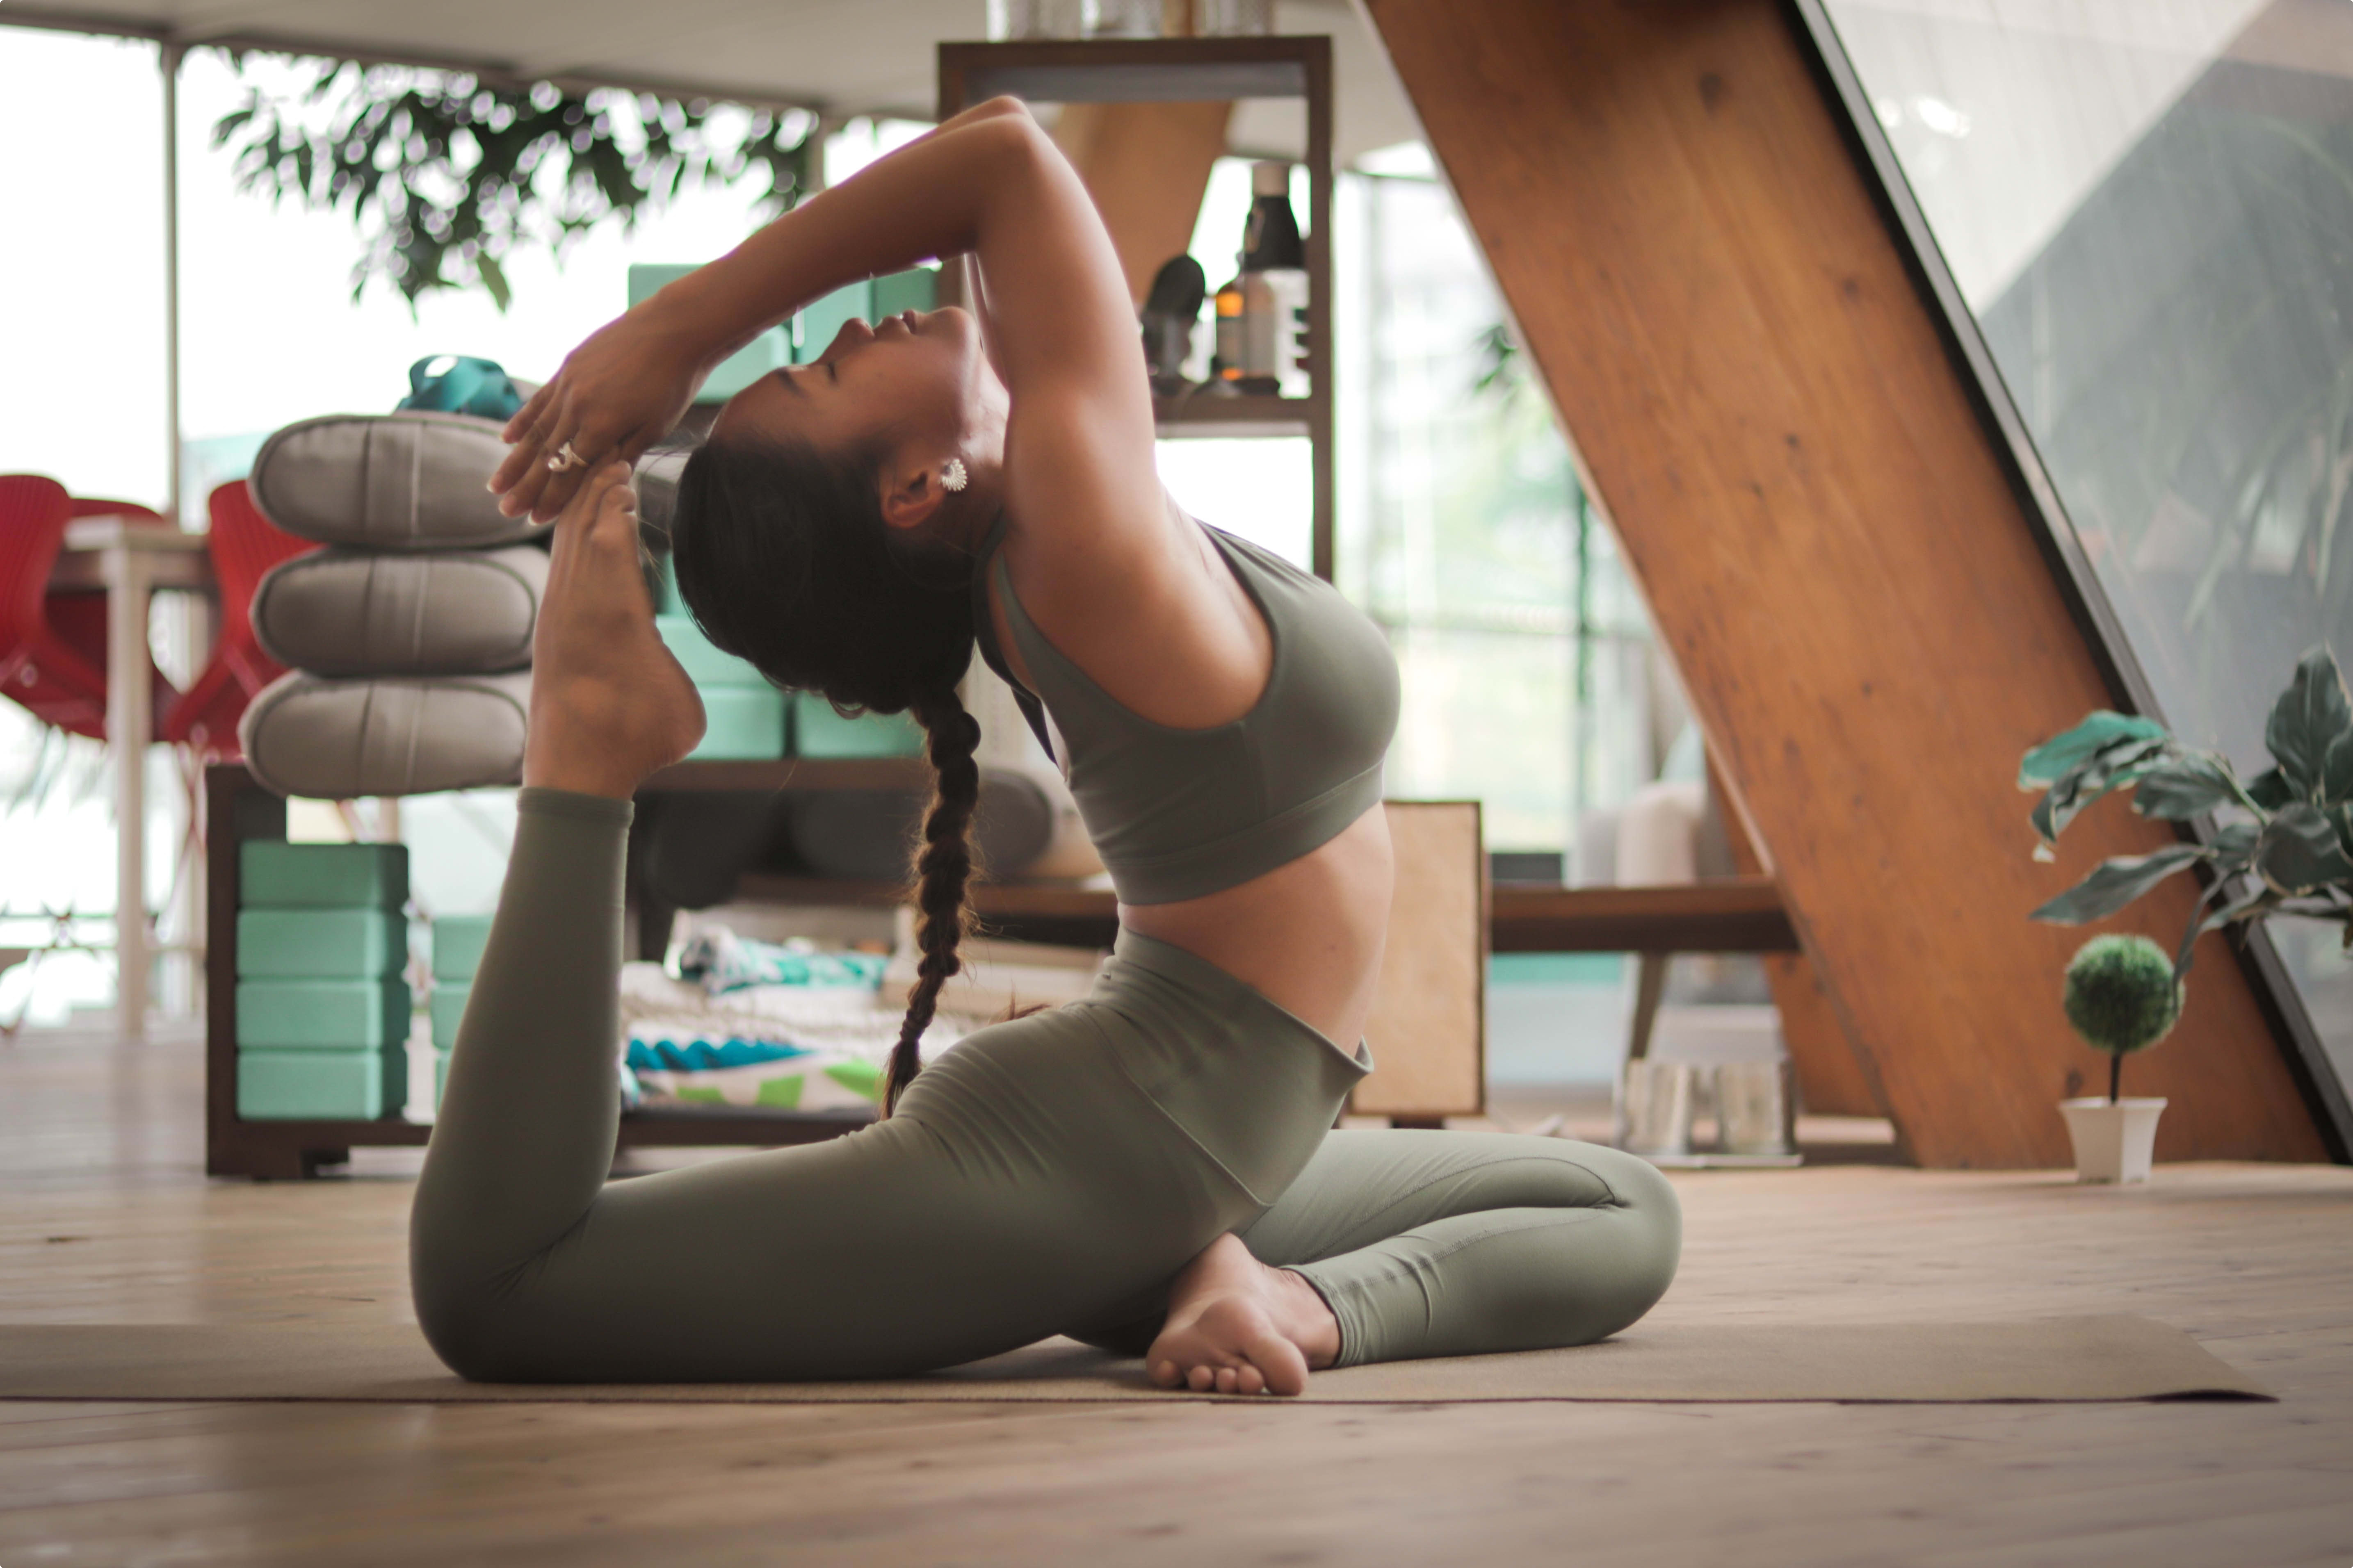 Interested in starting a Hatha yoga practice? 10 tips to get started!